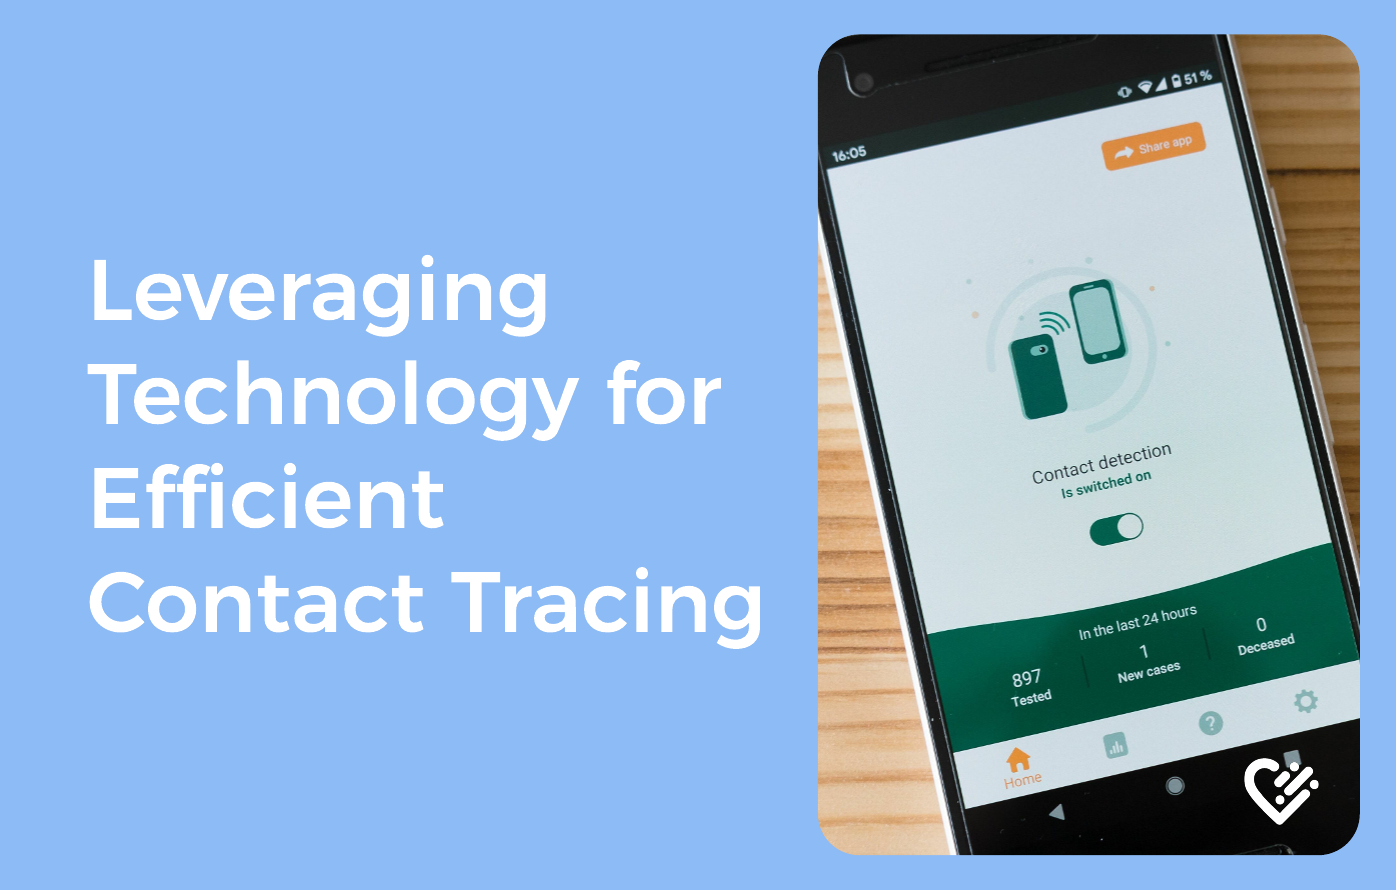 Leveraging Technology for Efficient Contact Tracing in Healthcare